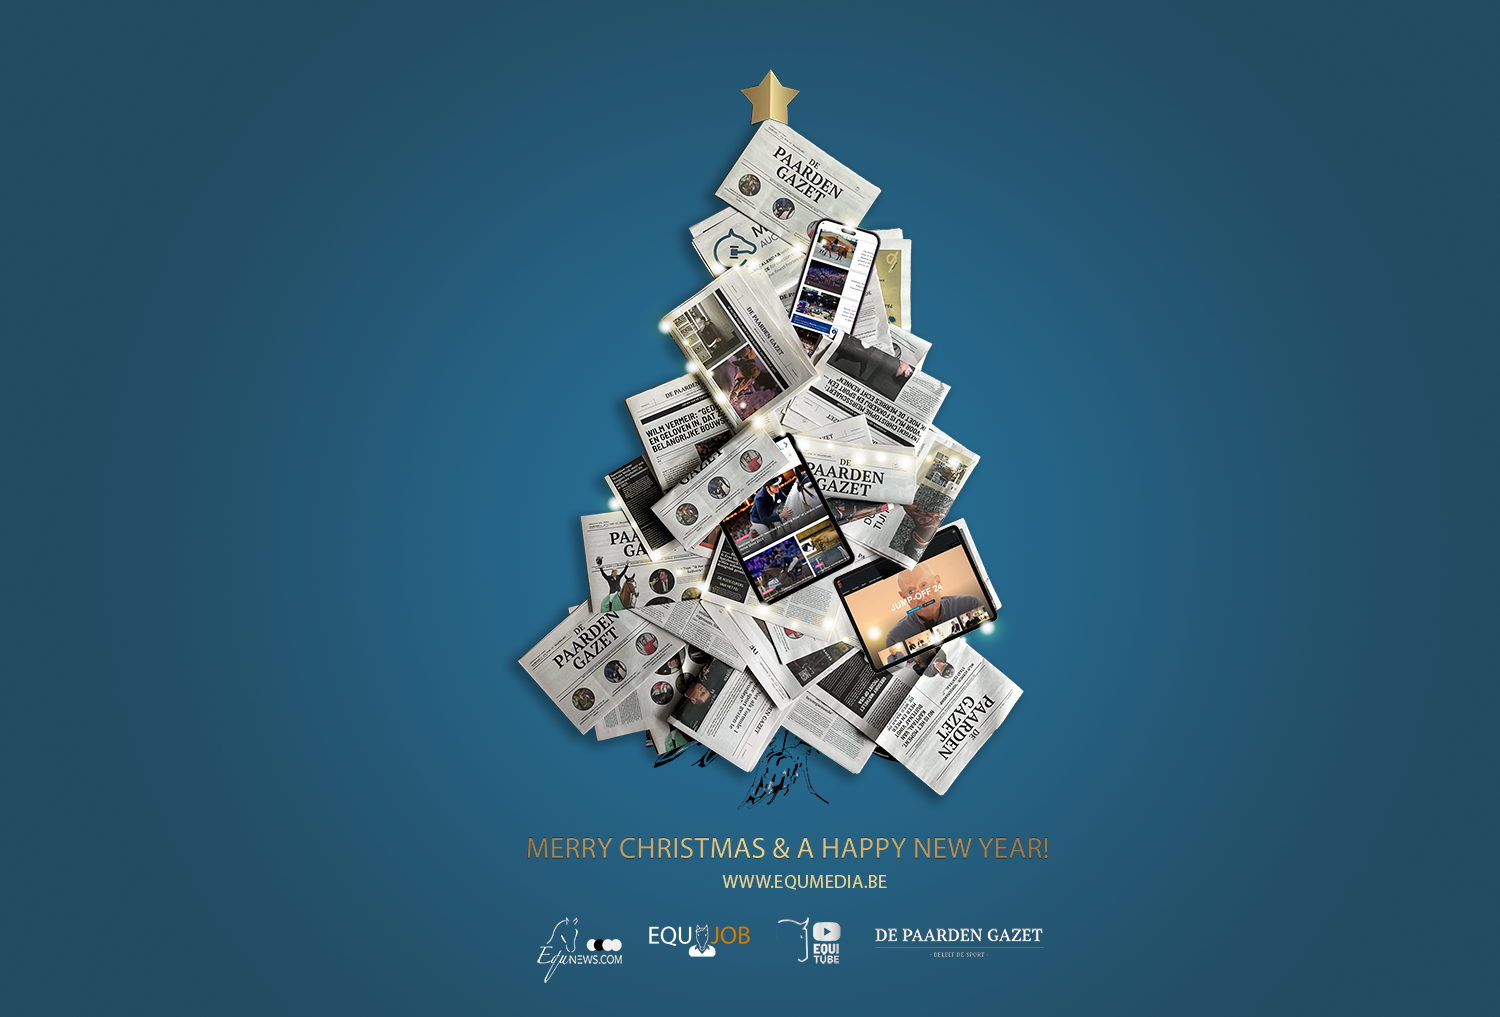 Merry Christmas from all of us at Equ.Media!